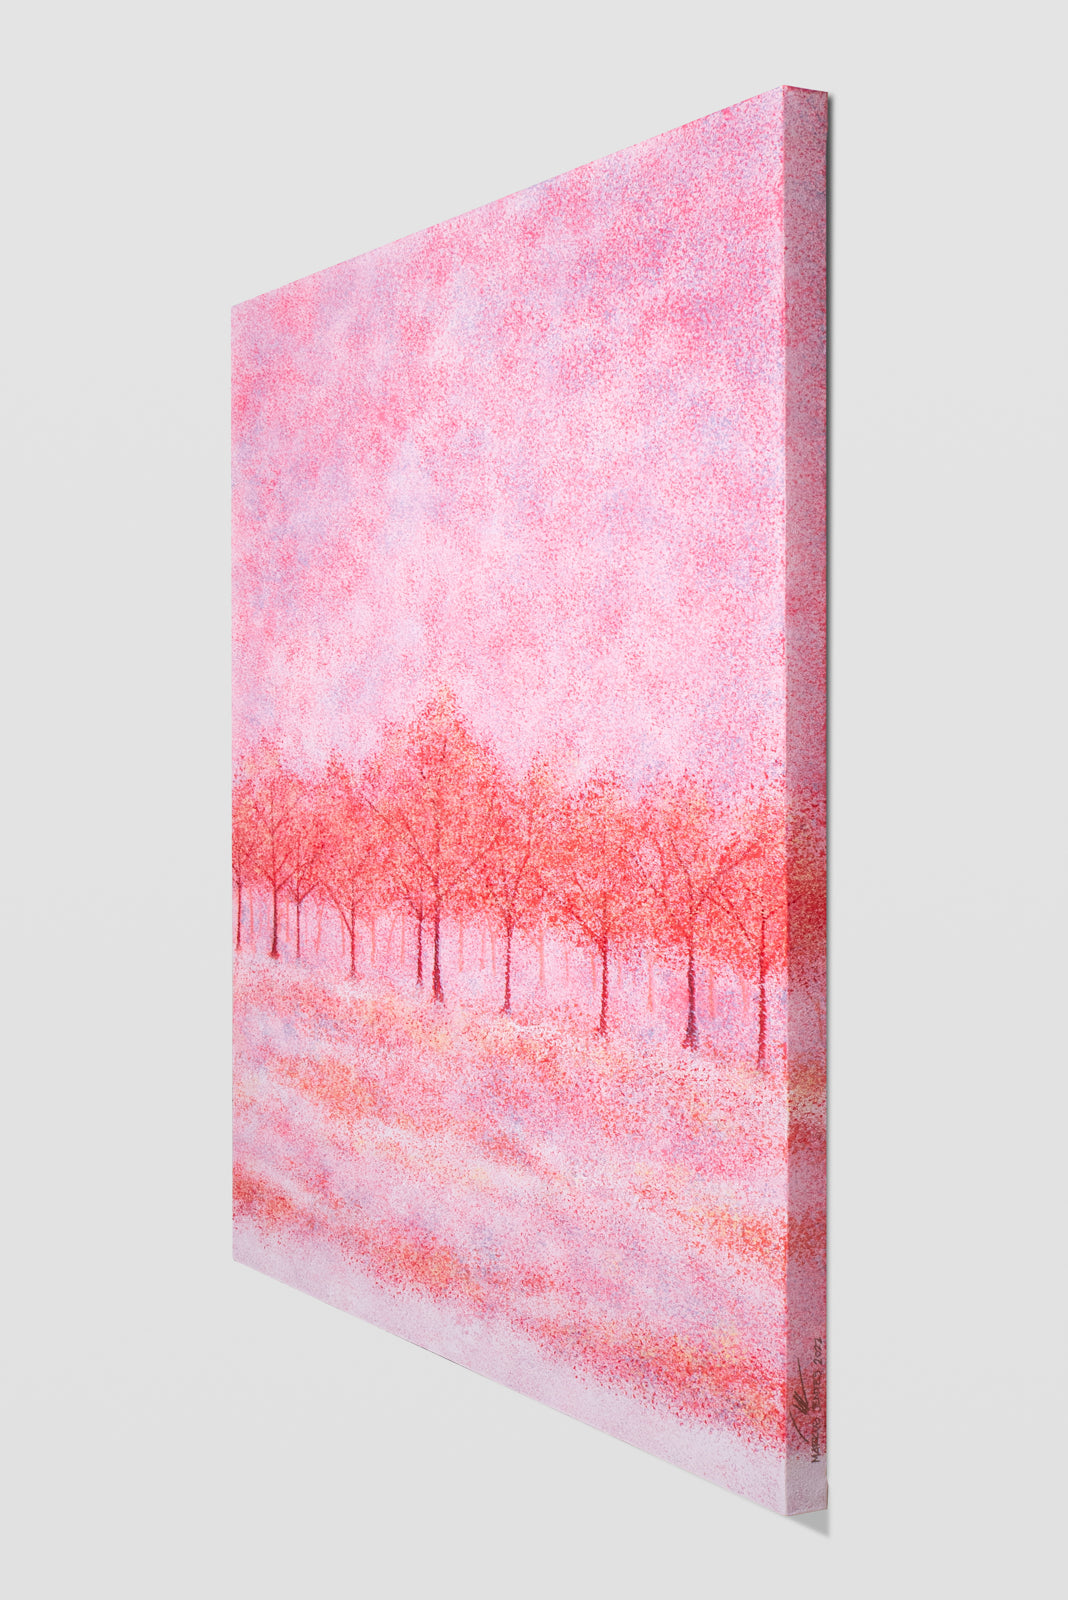 Blossom For Me - Acrylic on Canvas